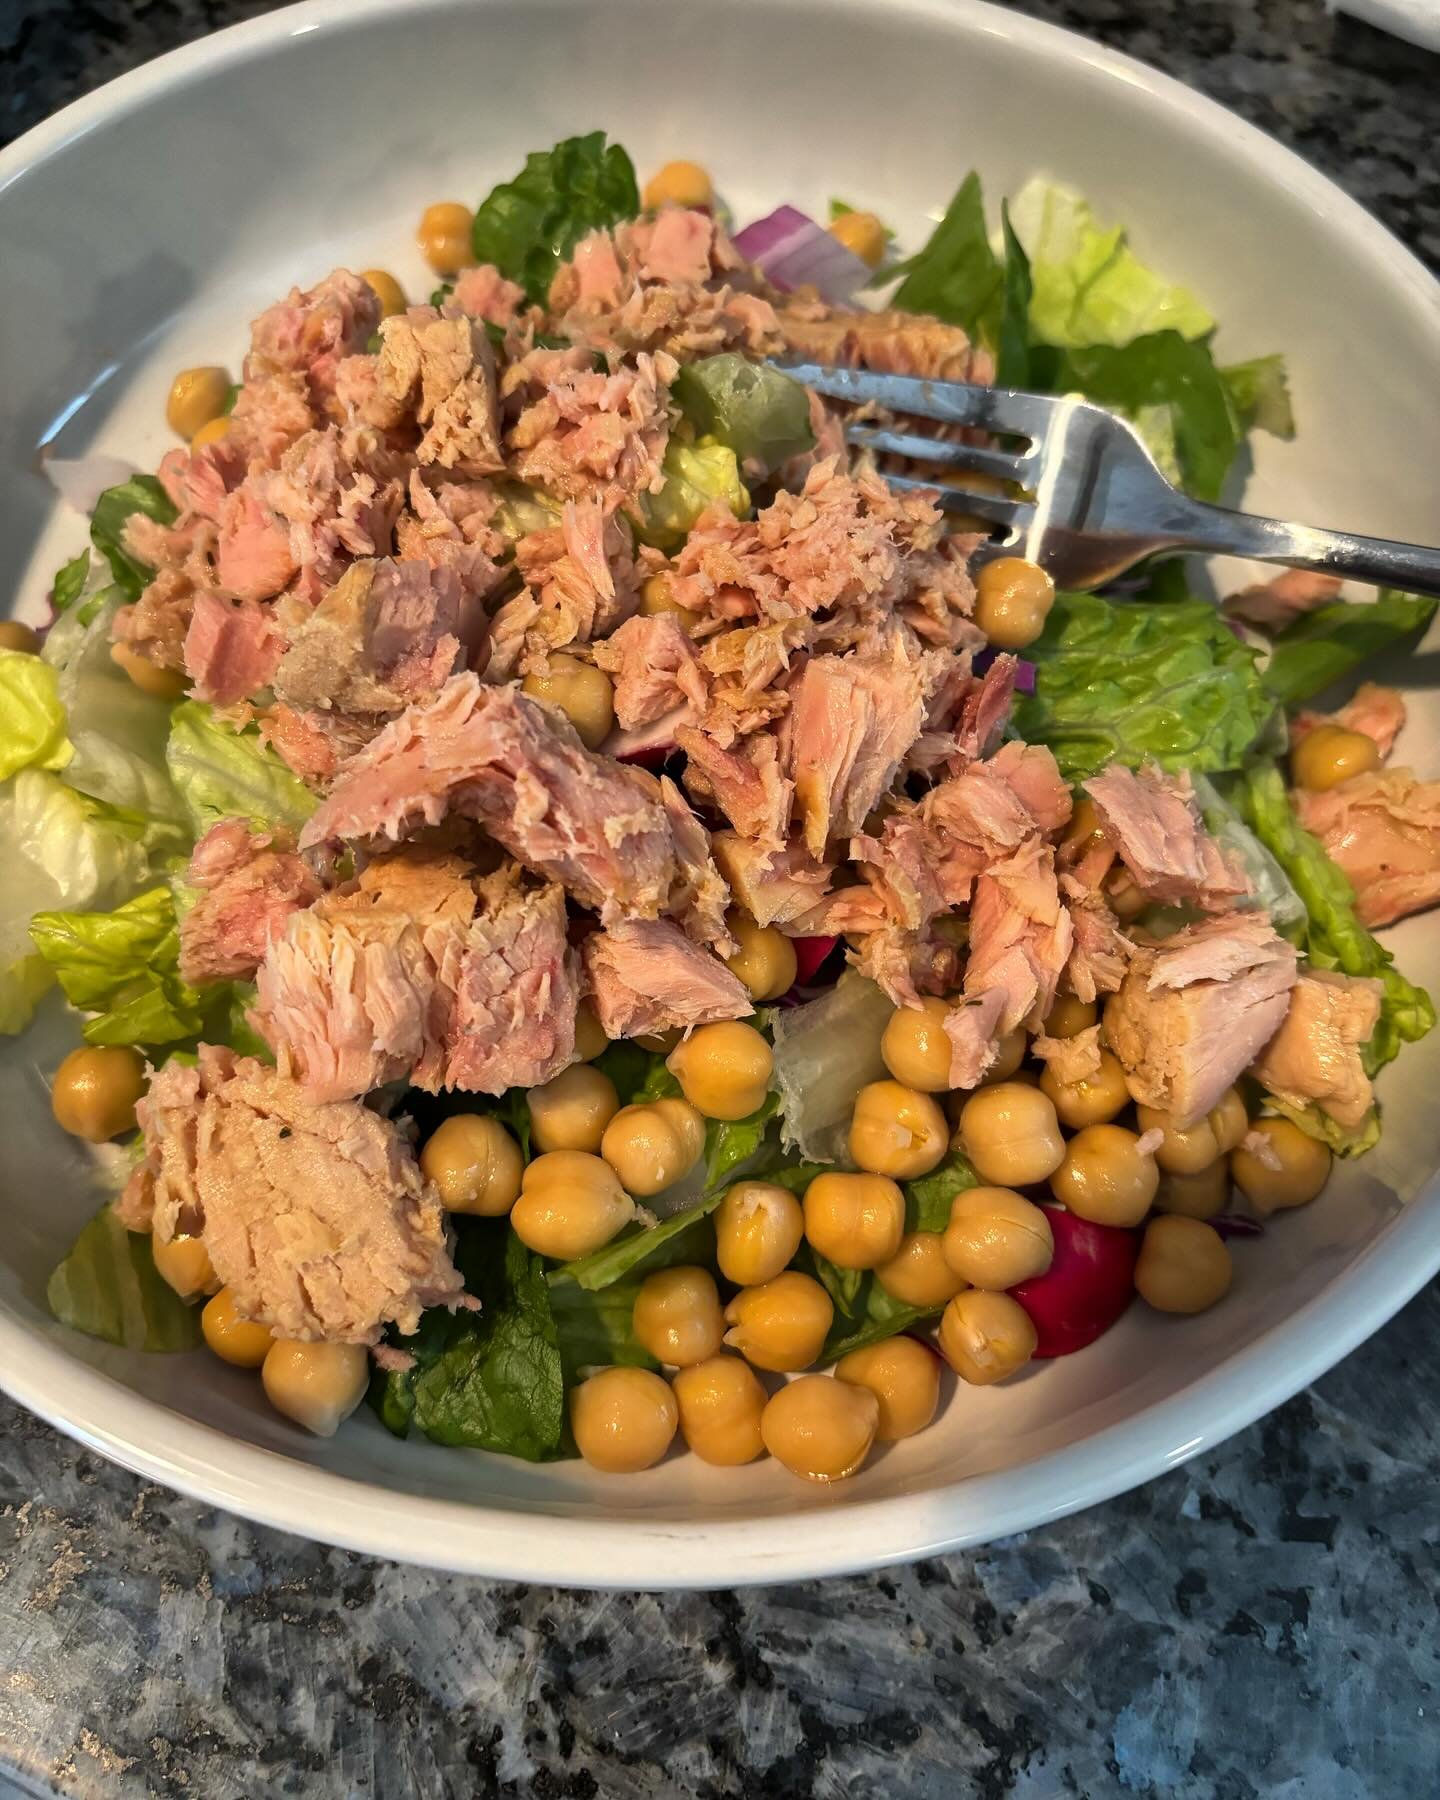 Easy, high protein dinner tonight! *Bag of Italian lettuce chopped 
*Chick peas 
*cherry tomatoes
*red onion sliced
*radishes chopped
*Genova yellow fin tuna (garlic and Tuscan herb)- @Shoprite
Dressing:
Olive oil and red wine vinegar with oregano 
*